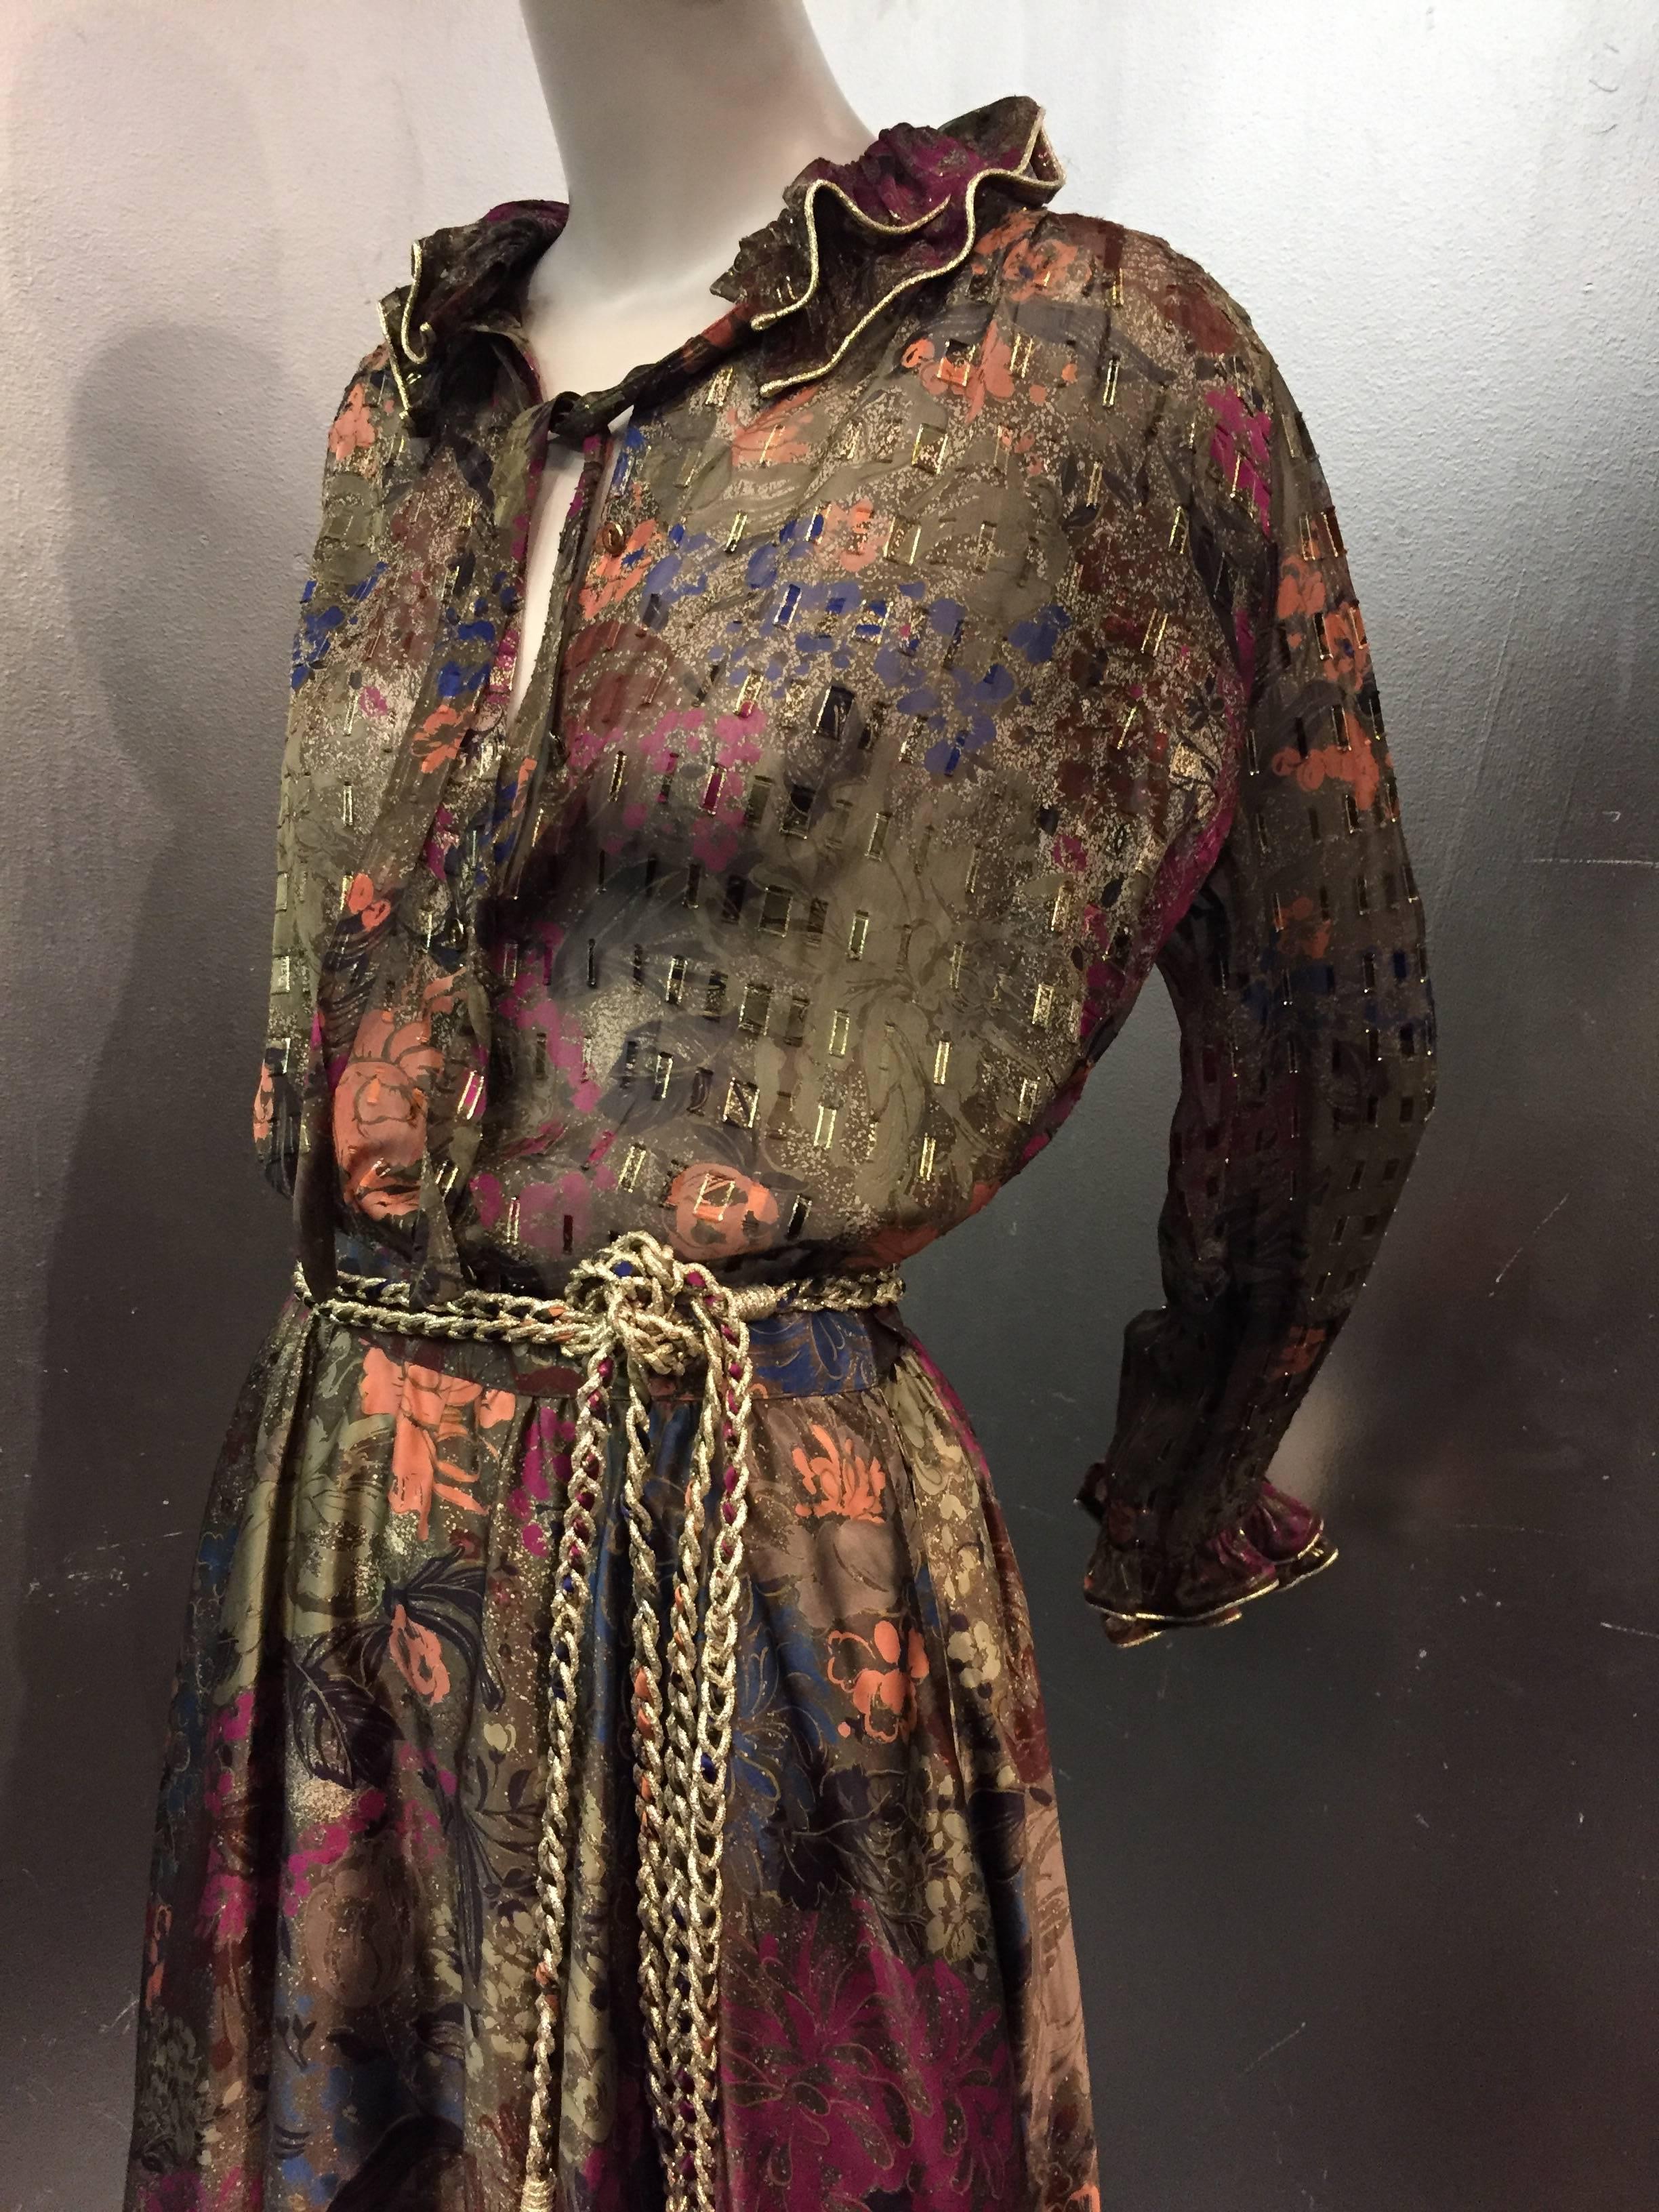 1980s Louis Feraud autumnal-hued floral print silk chiffon 2-piece ensemble:  Ruffled neckline and cuffs trimmed with lamé piping on unlined blouse. Skirt is lined, full and trimmed with chiffon ruffle.  Gold lamé braid belt included. 